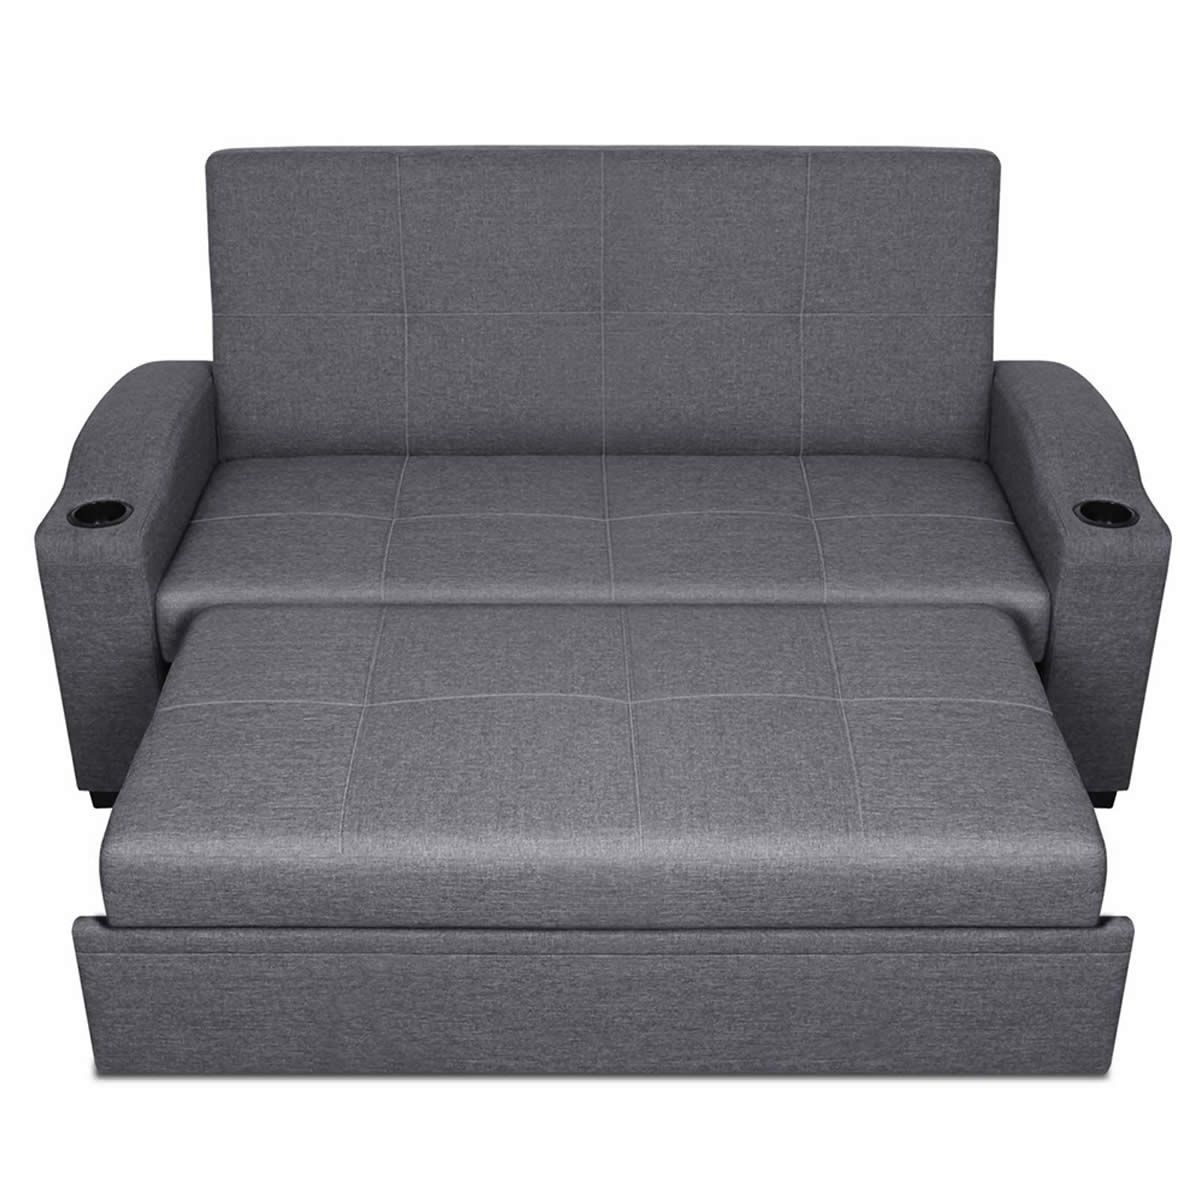 3 Seater Pull Out Sofa Bed Lounge Couch – Grey | Crazy Sales With 3 In 1 Gray Pull Out Sleeper Sofas (View 20 of 20)